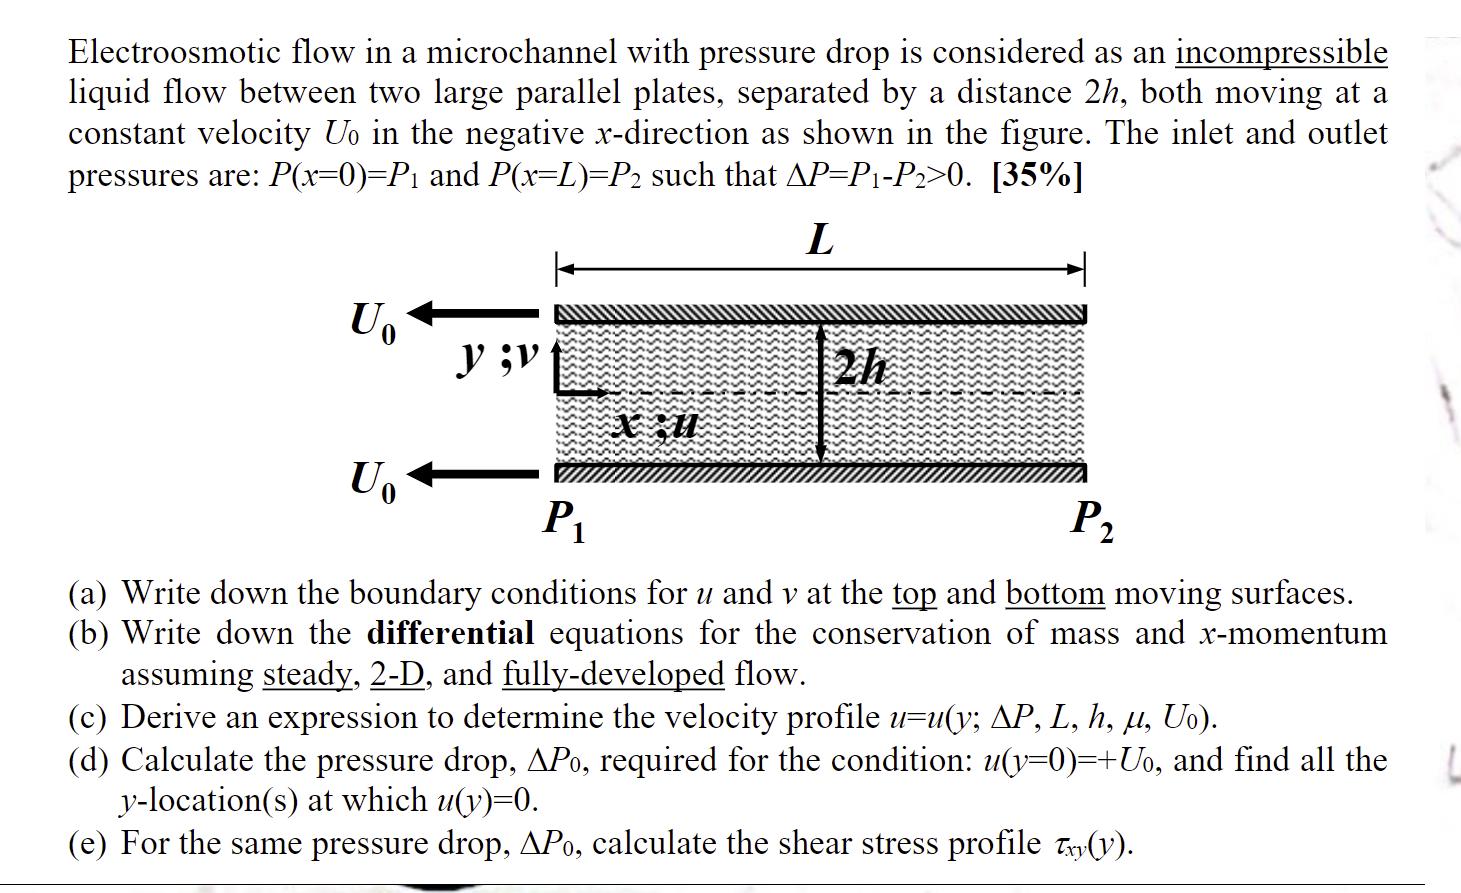 Electroosmotic flow in a microchannel with pressure drop is considered as an incompressible liquid flow